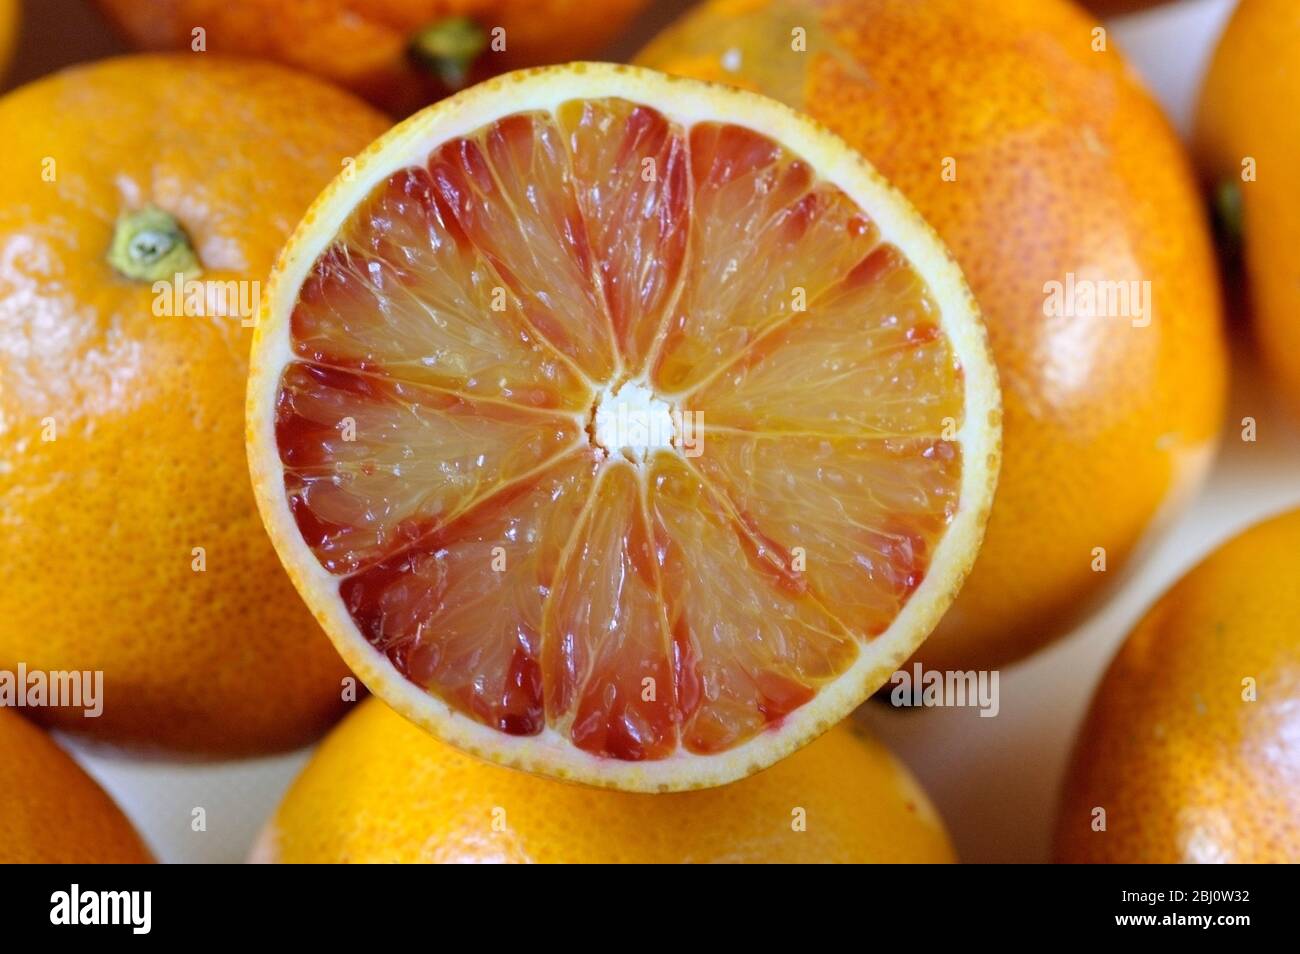 Blood orange, cut in half on white surface with whole oranges behind - Stock Photo